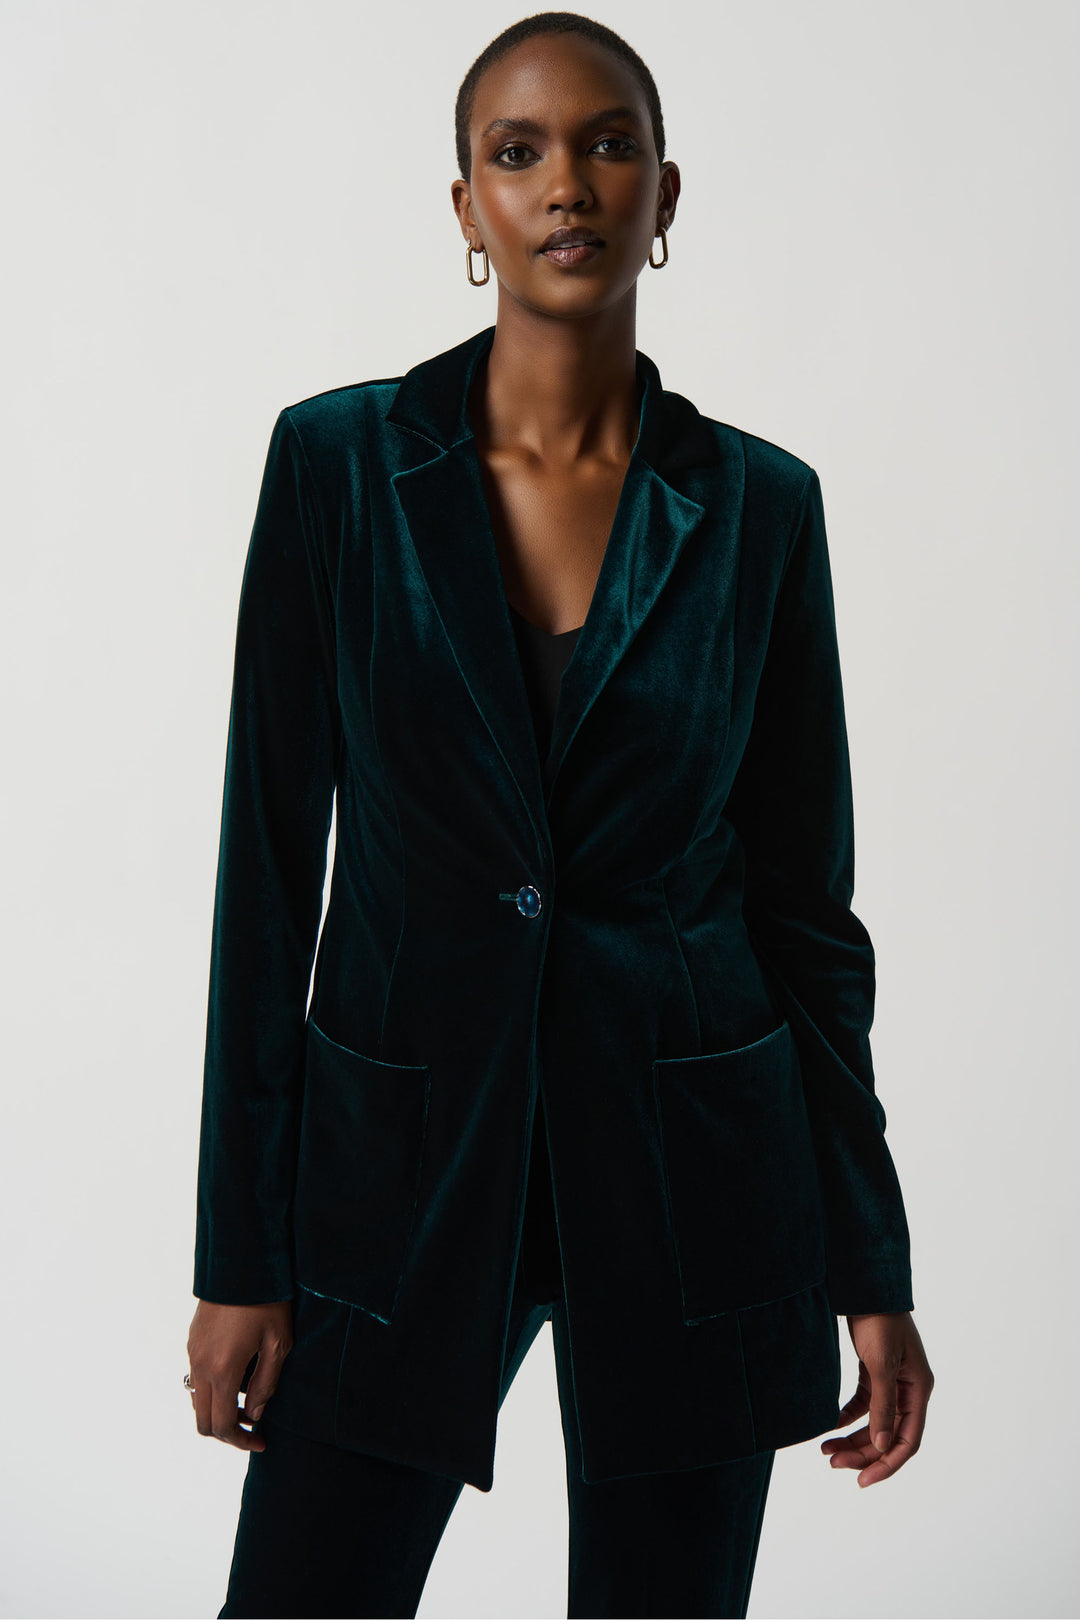 Composed with a fitted silhouette, notched collar and luxurious velvet touch, you'll look effortlessly chic in this classic blazer.